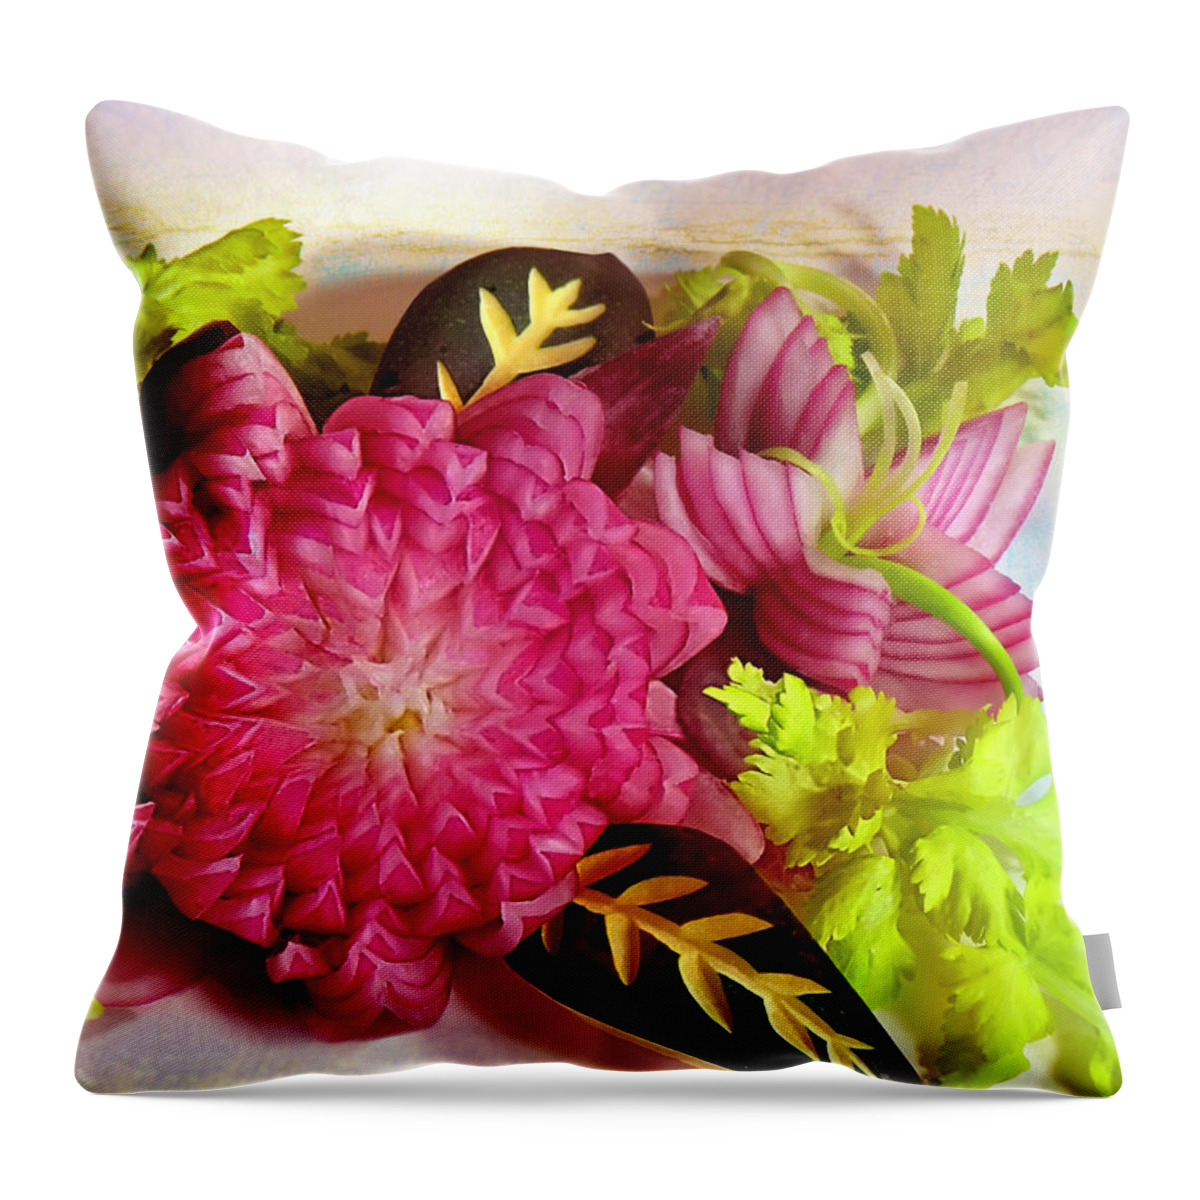  Throw Pillow featuring the photograph Spanish Flowers by John Poon